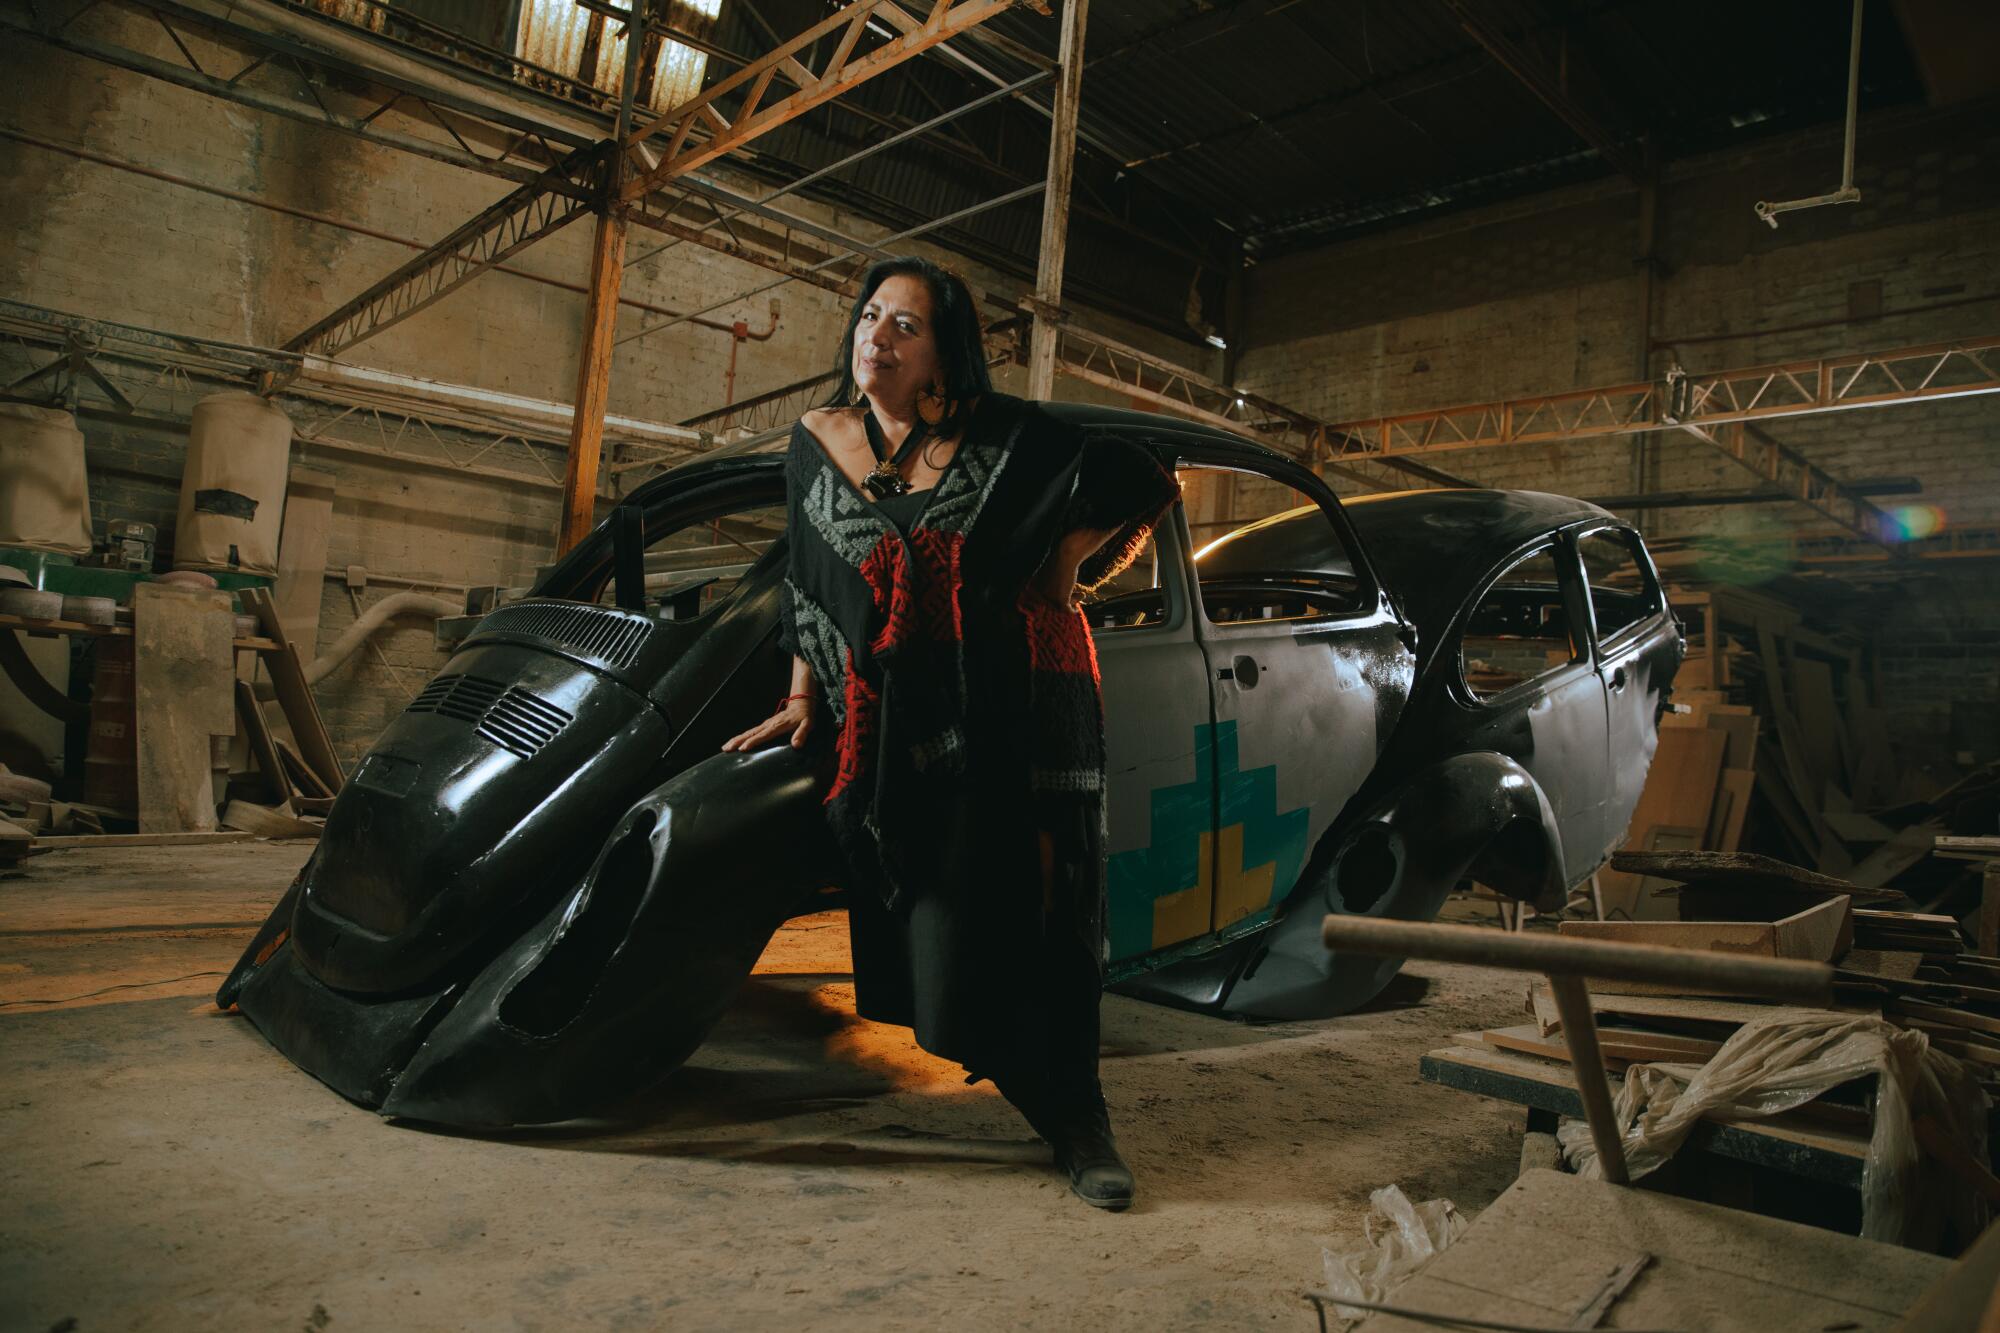 An artist leans against the frame of an old Volkswagen Beetle.